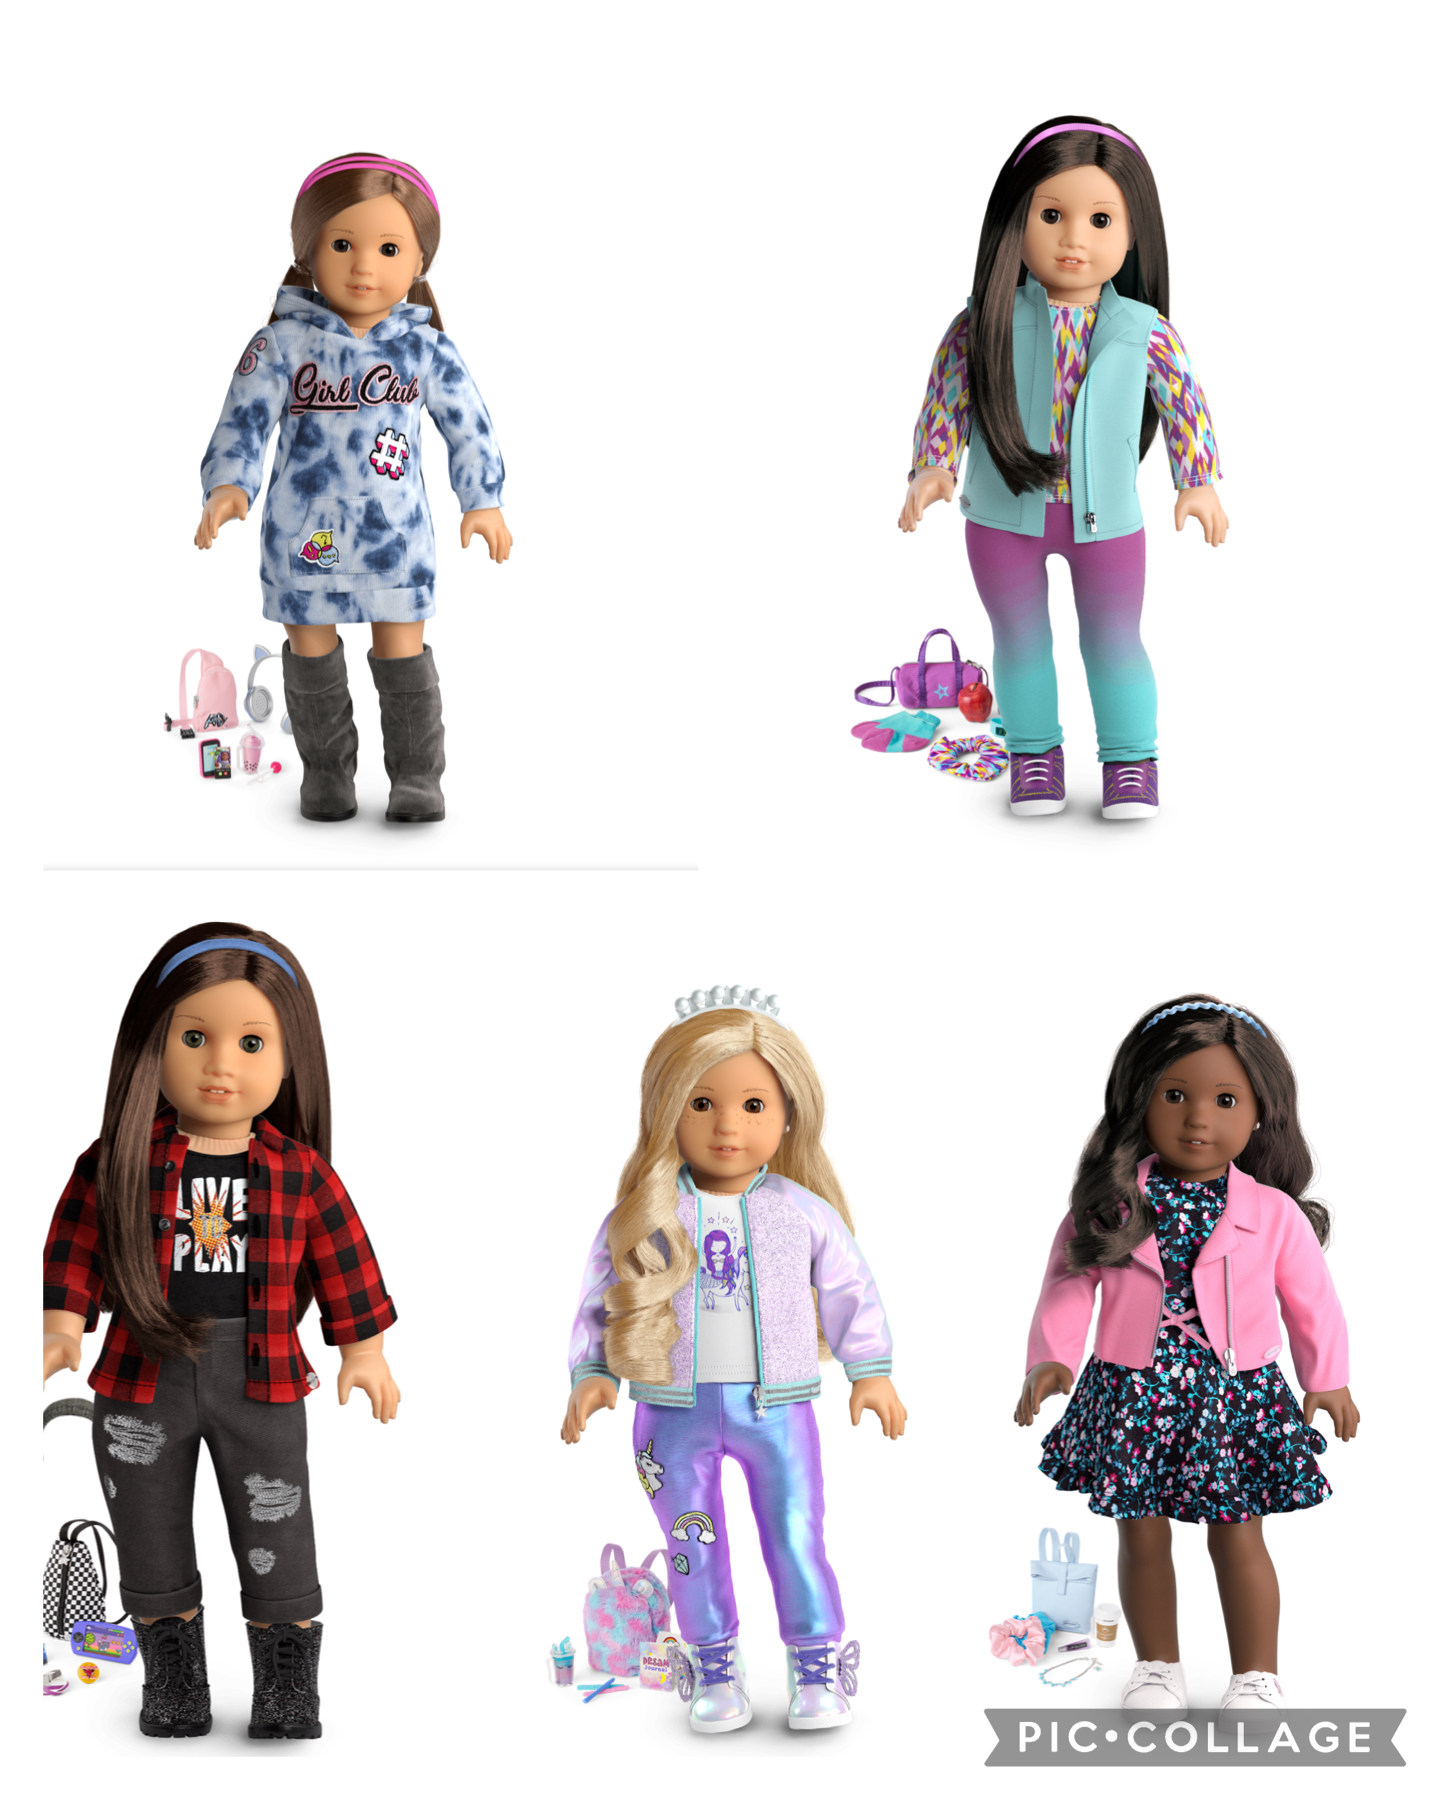 If my friends were American Girl dolls, this is what they would look like! Guys who they are!